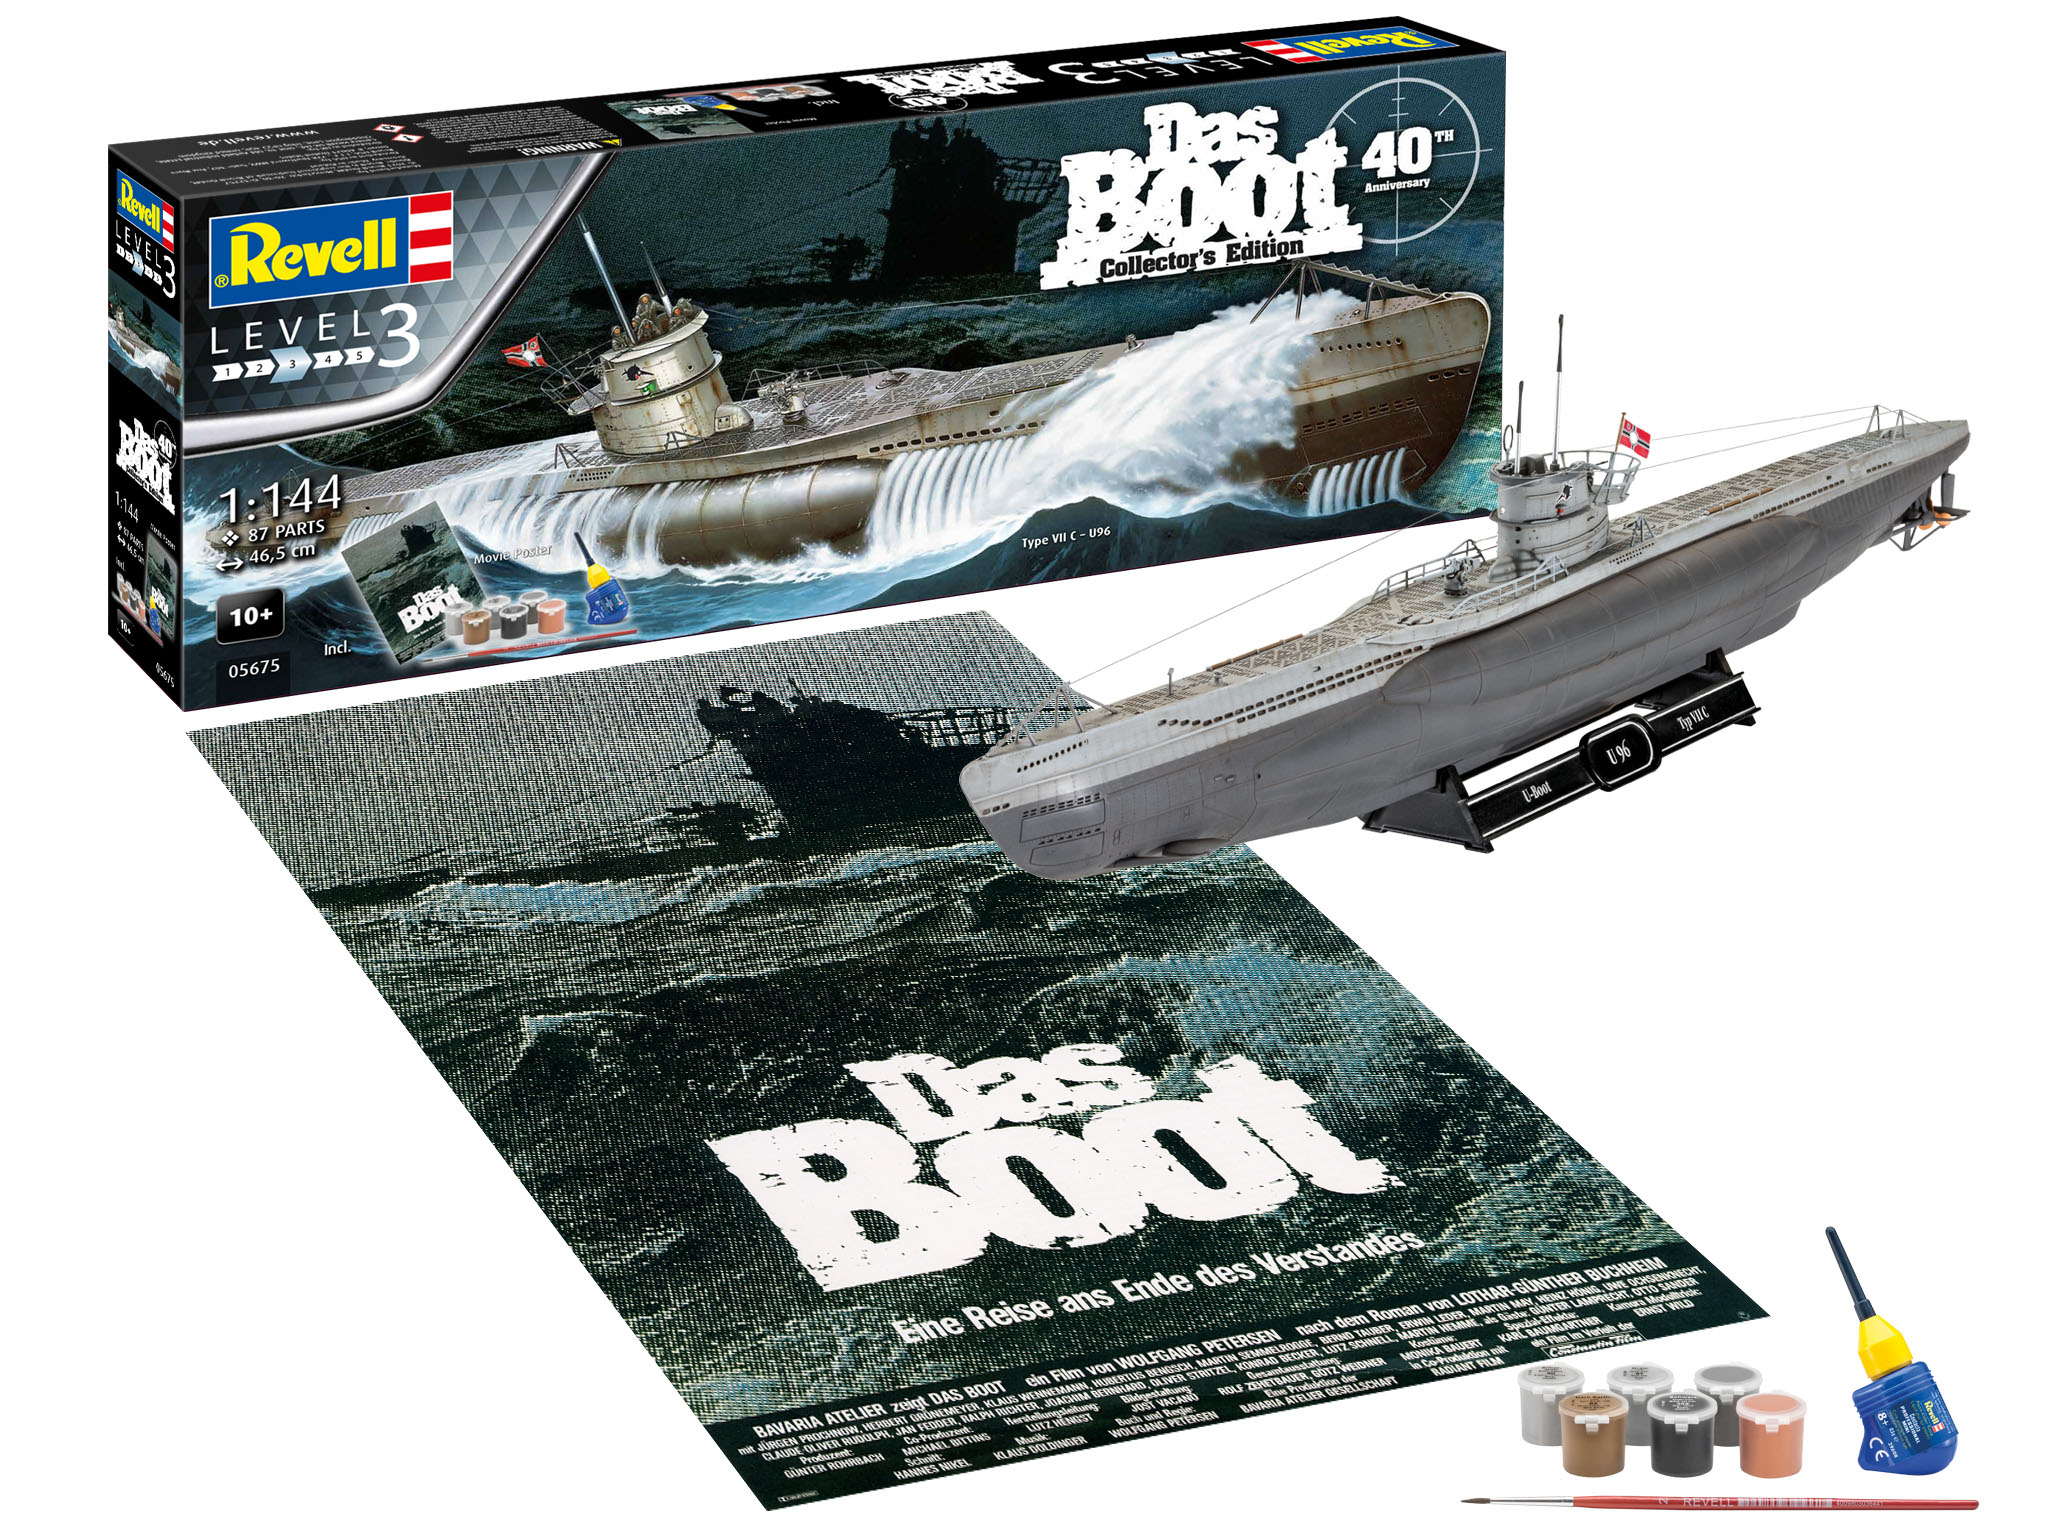 Revell Das Boot Collector's Edition 40th Anniversary in 1:144 bouwpakket